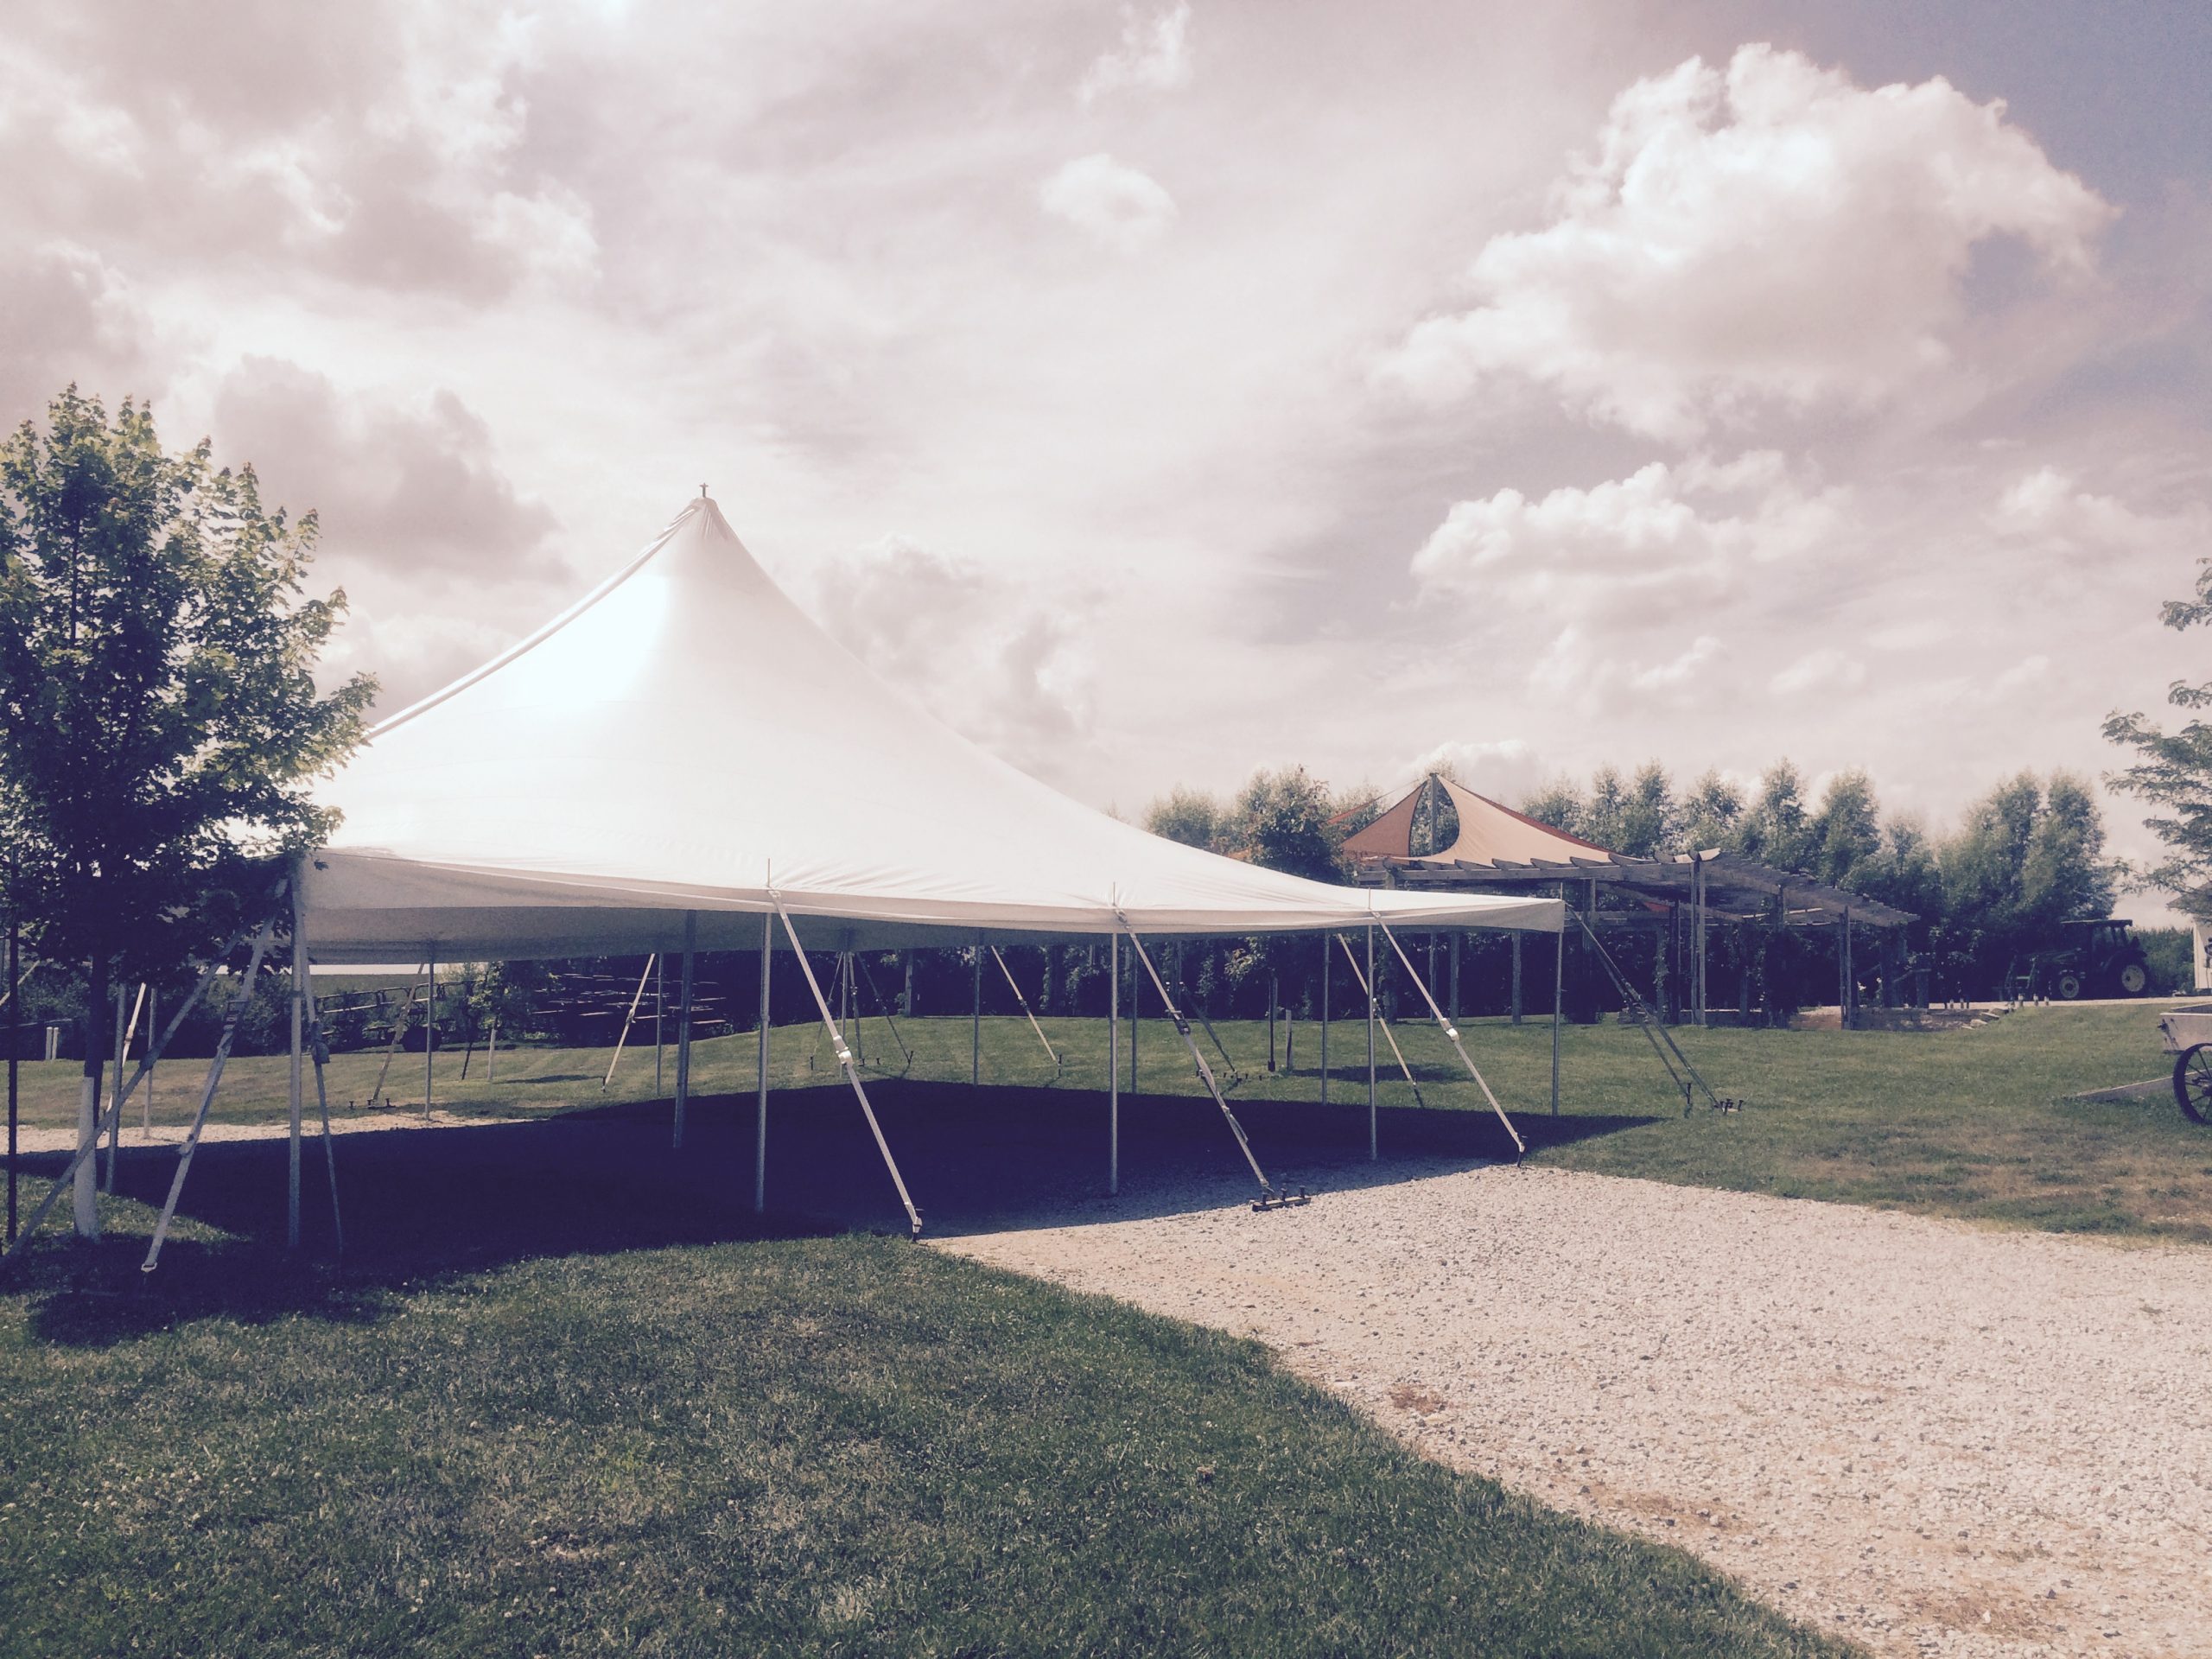 View of rope and pole tent at Sutliff Cider Company for 2015 RAGBRAI